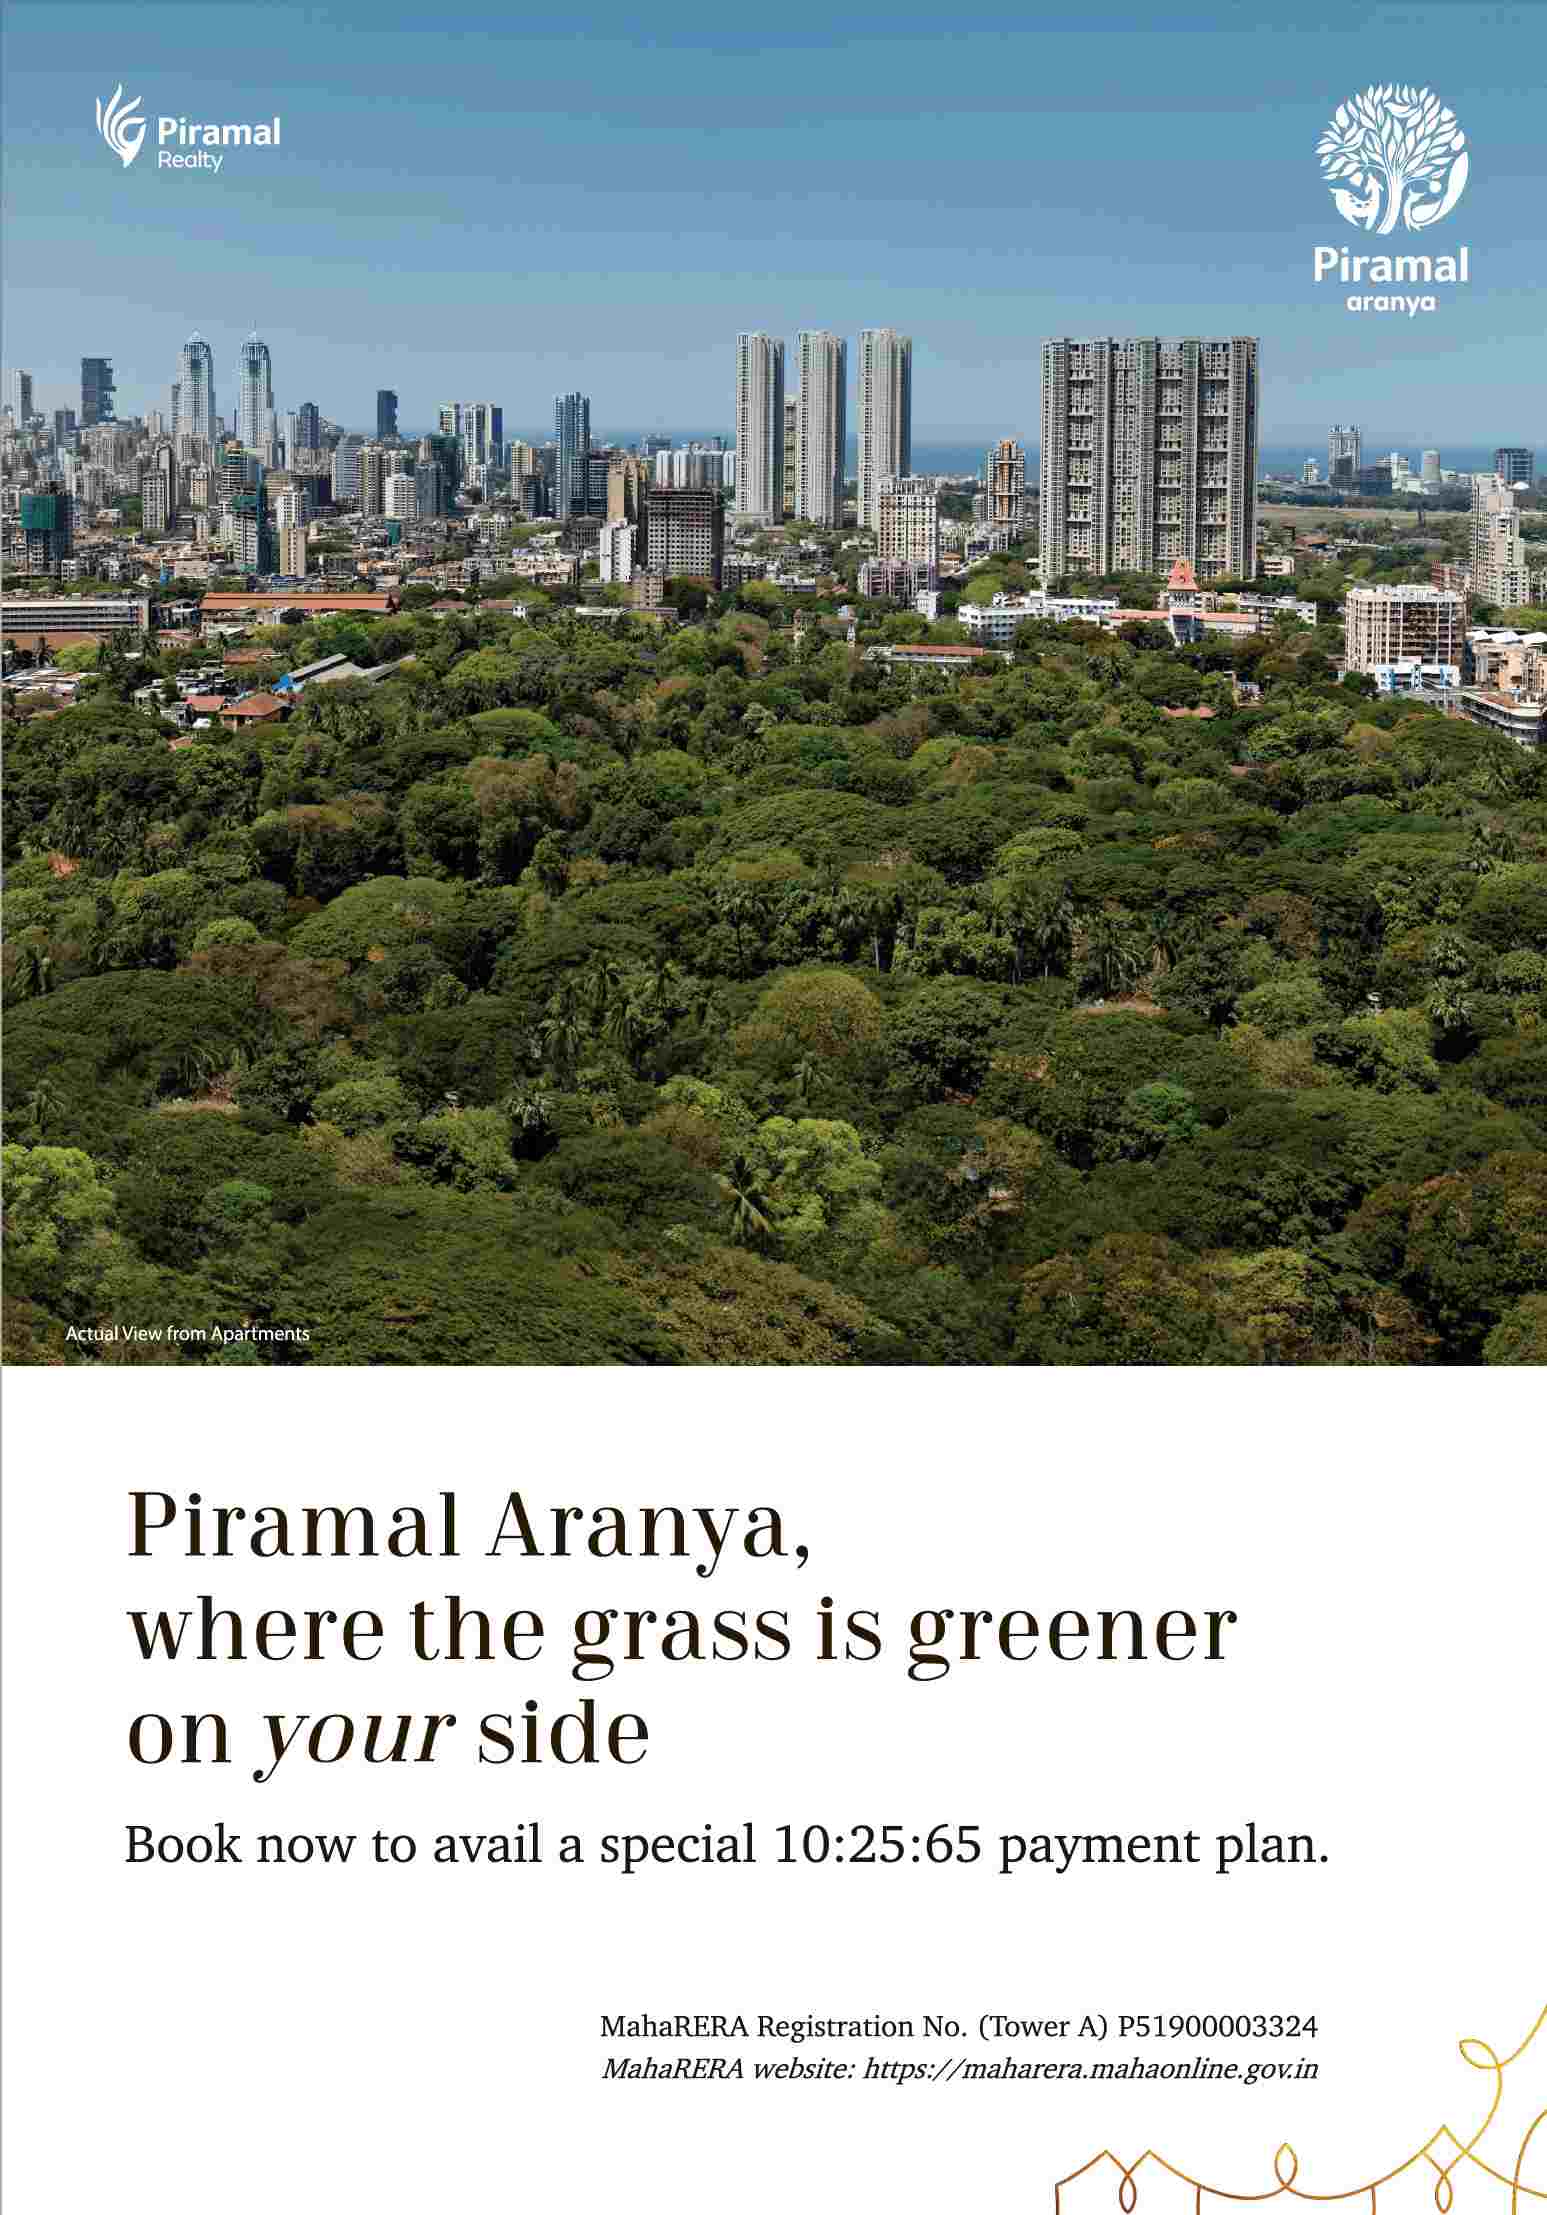 Book now to avail a special 10:25:65 payment plan at Piramal Aranya in Mumbai Update